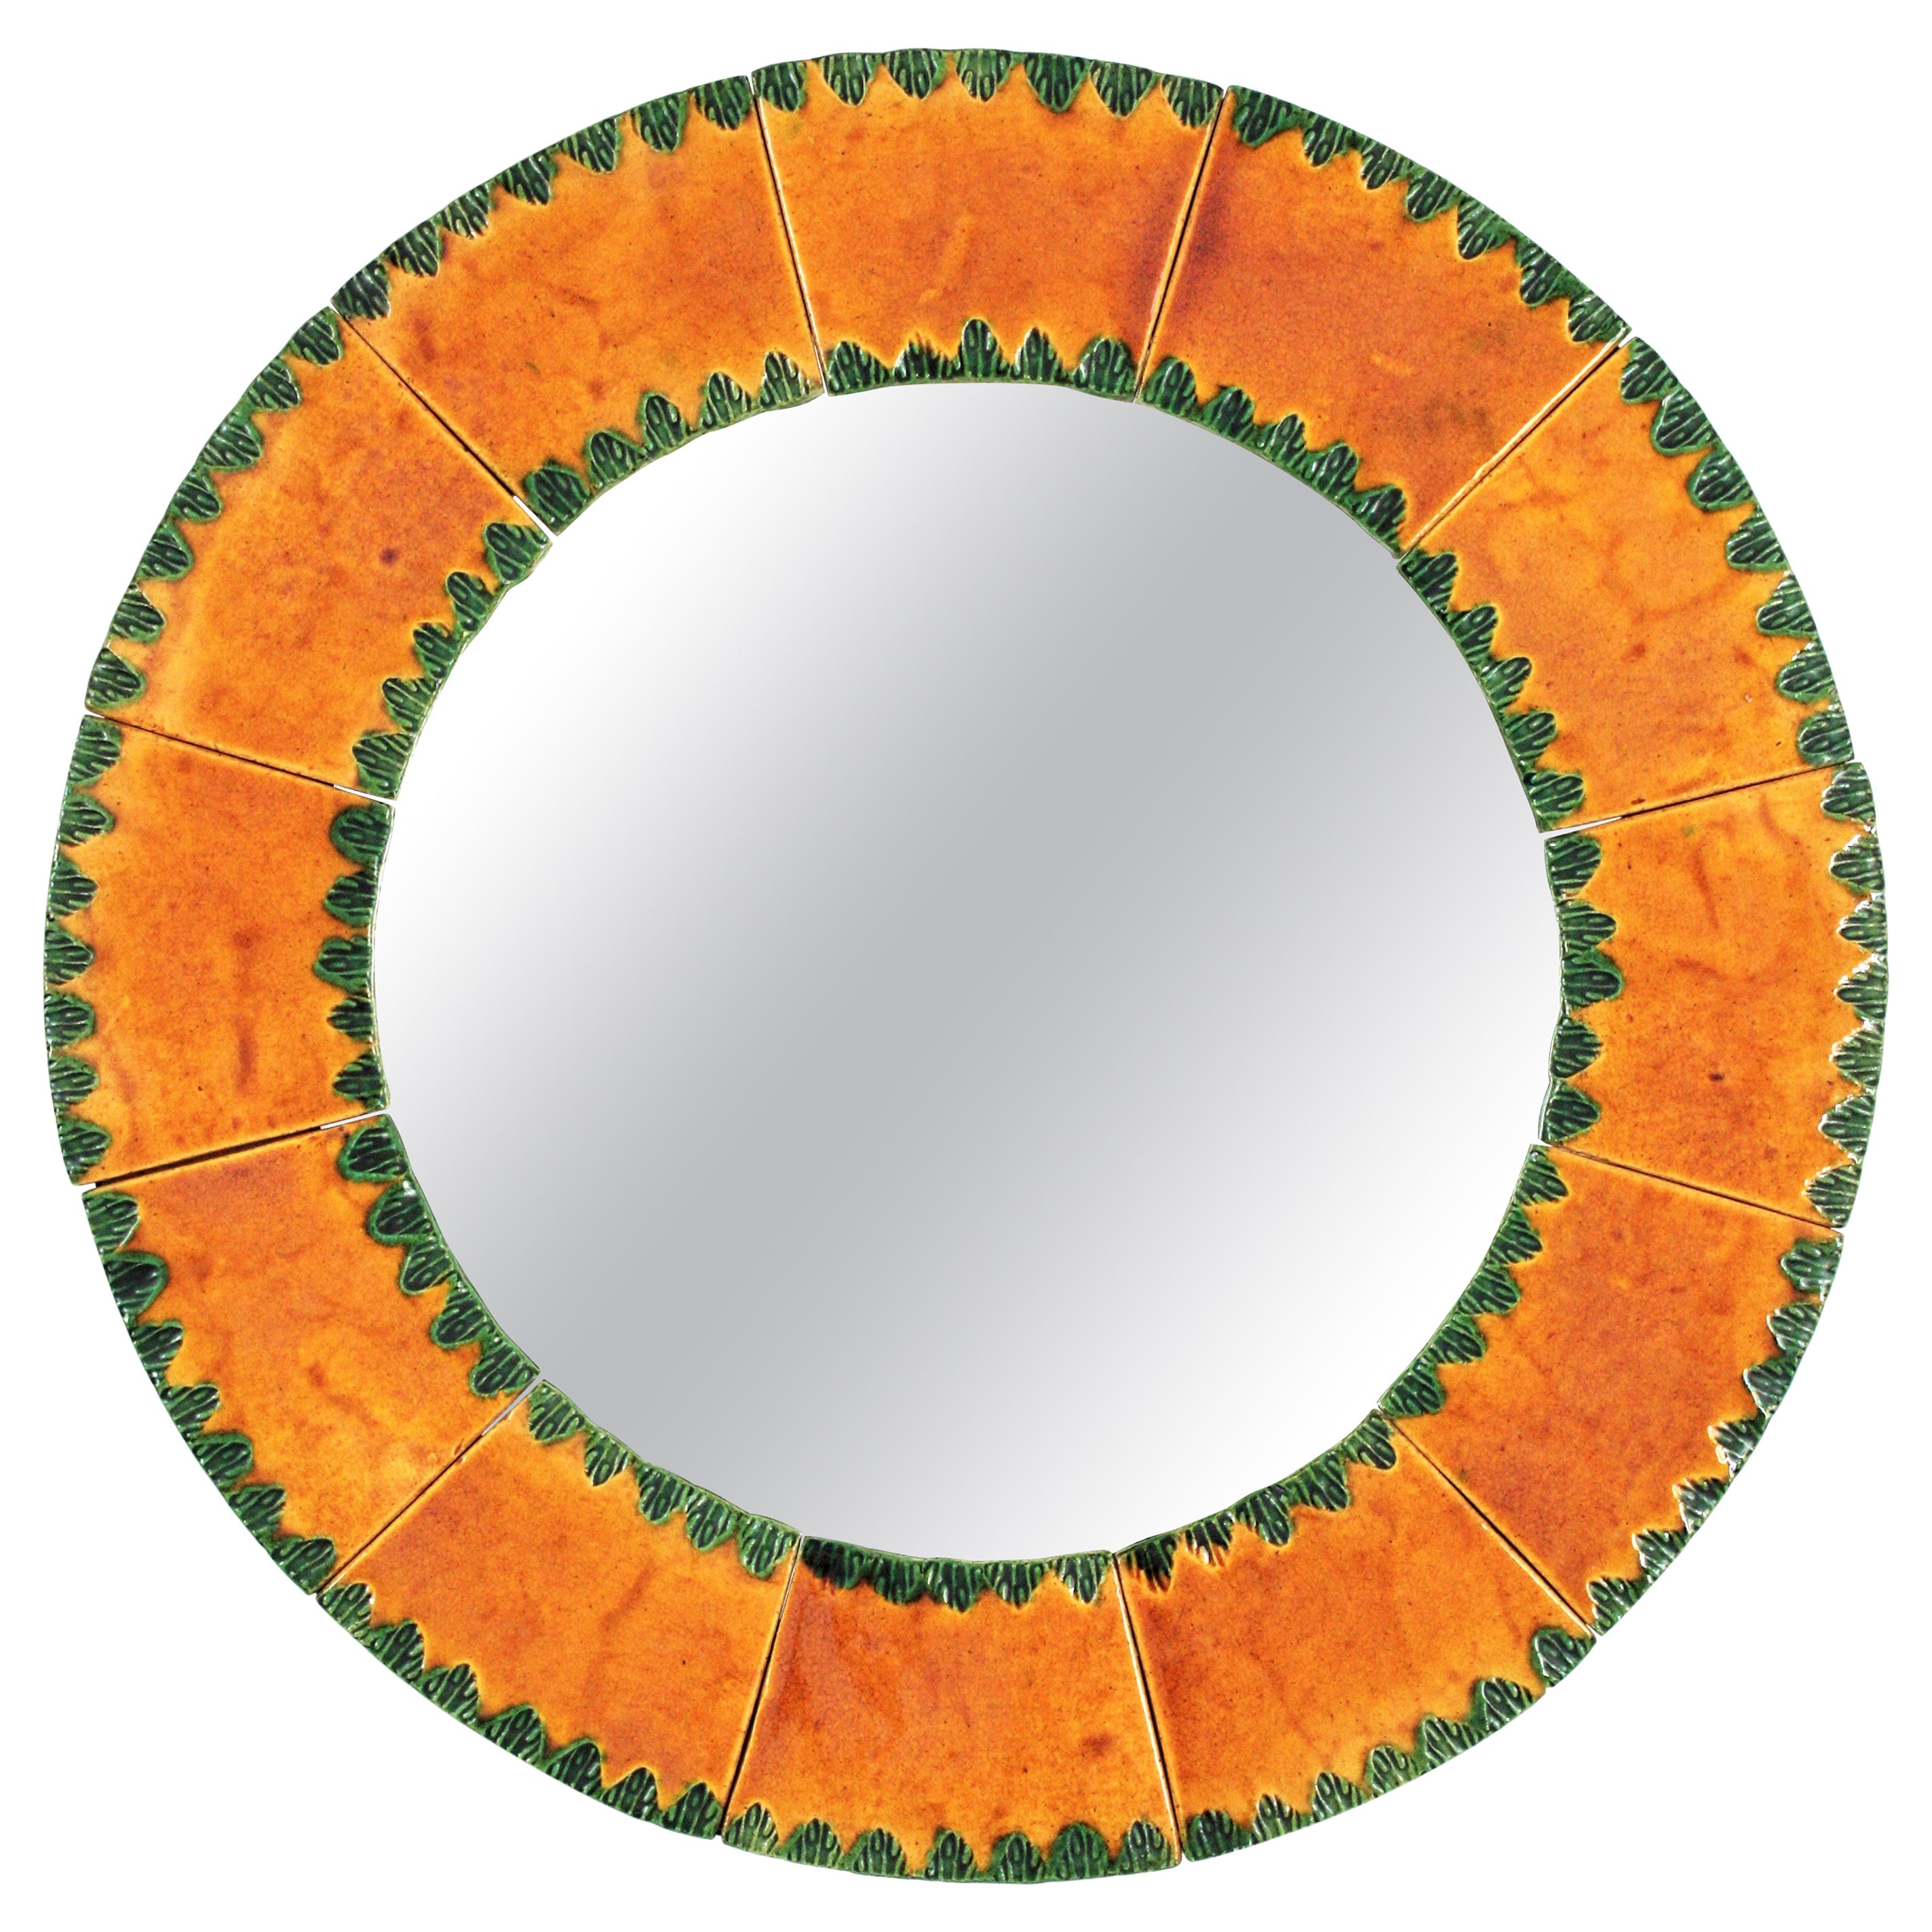 Vallauris François Lembo Style Ceramic Round Mirror in Orange and Green